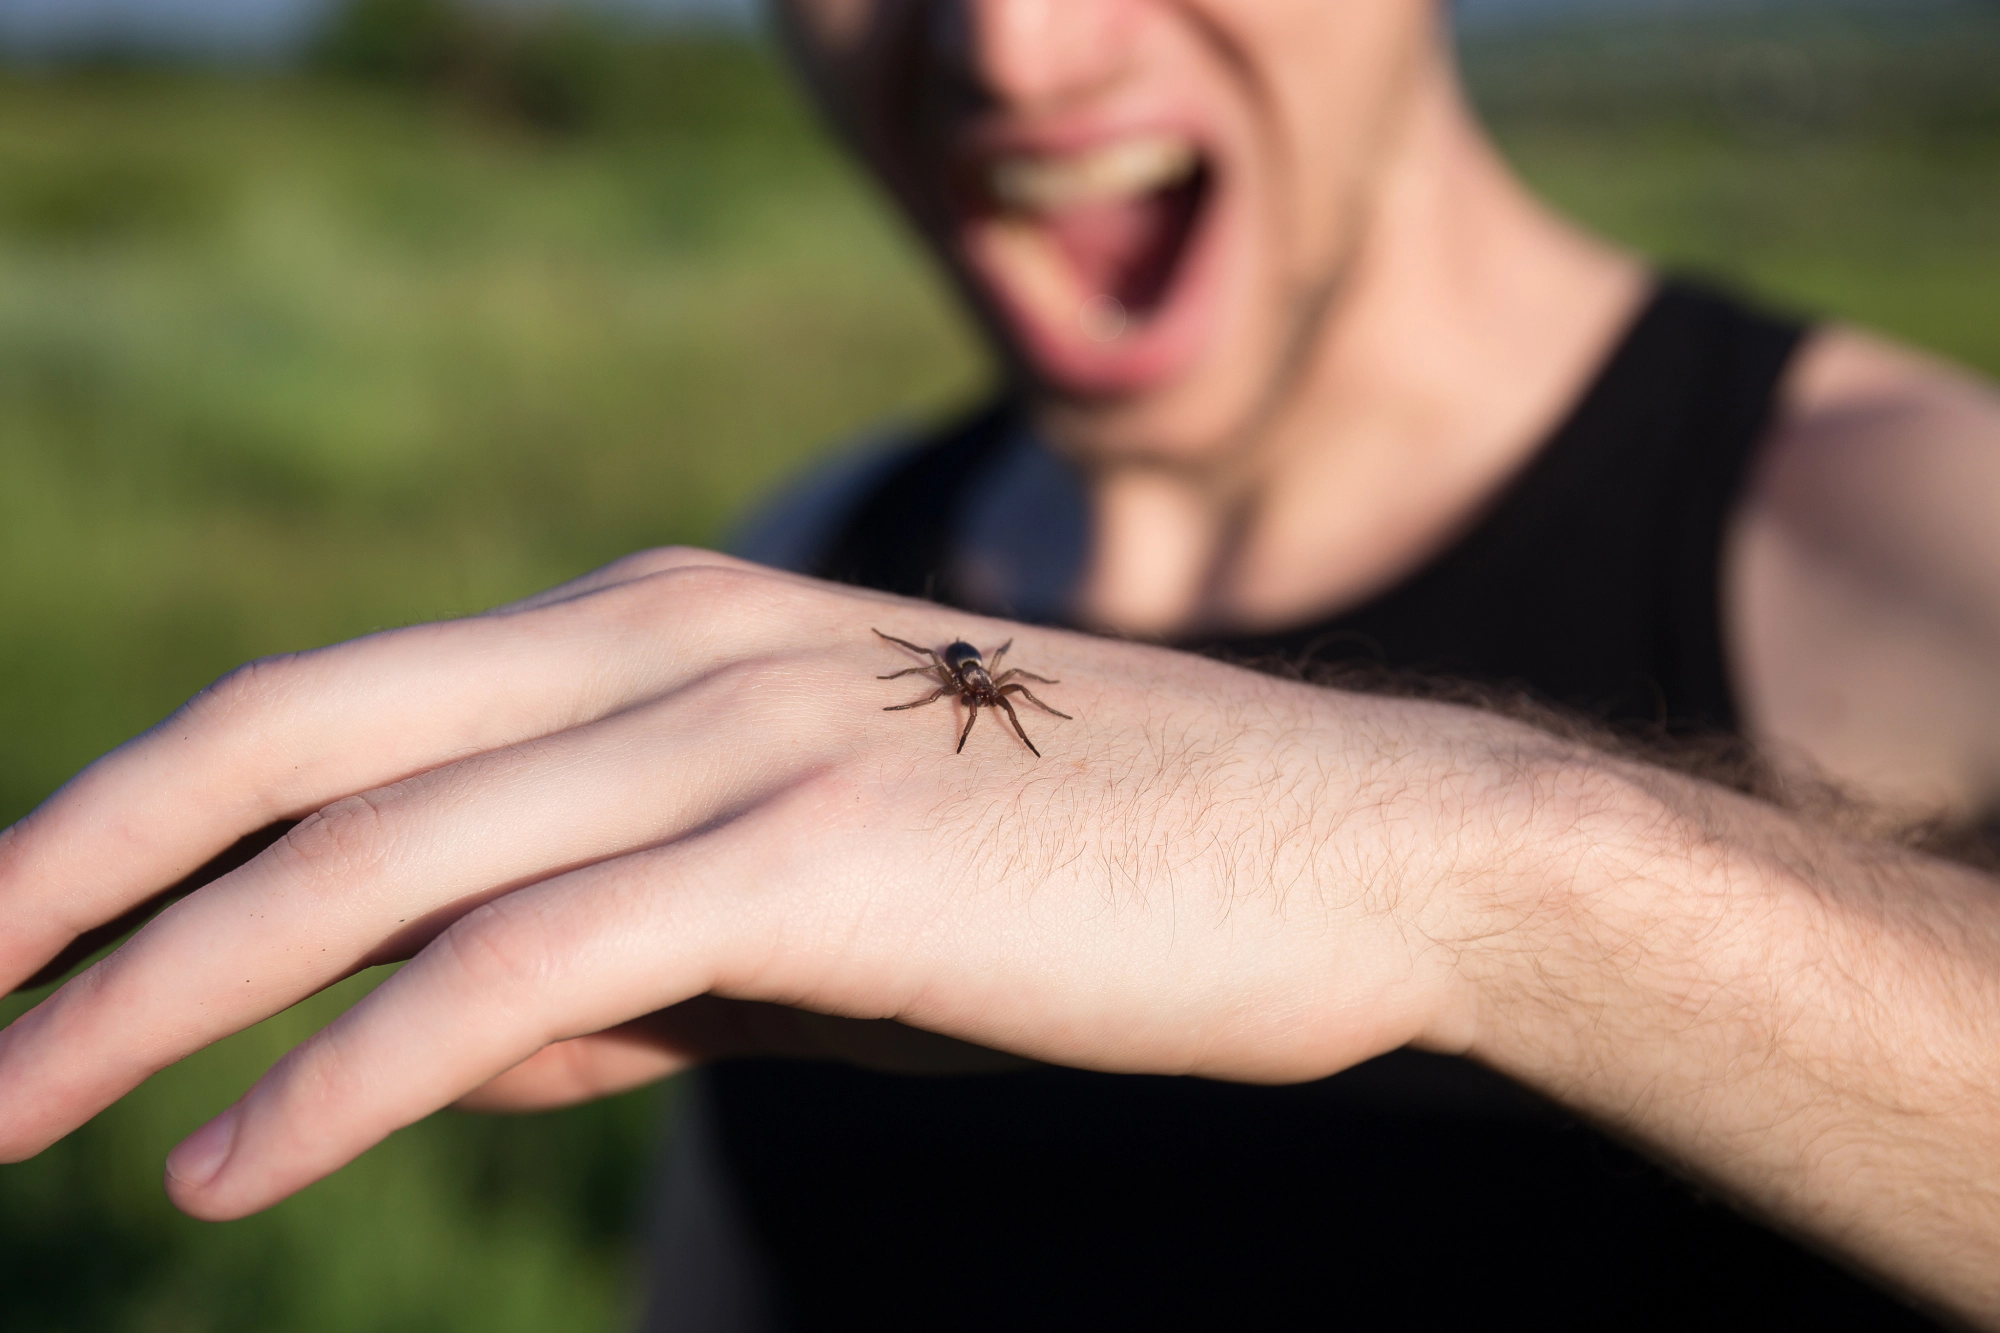 How to Treat an Infected Spider Bite